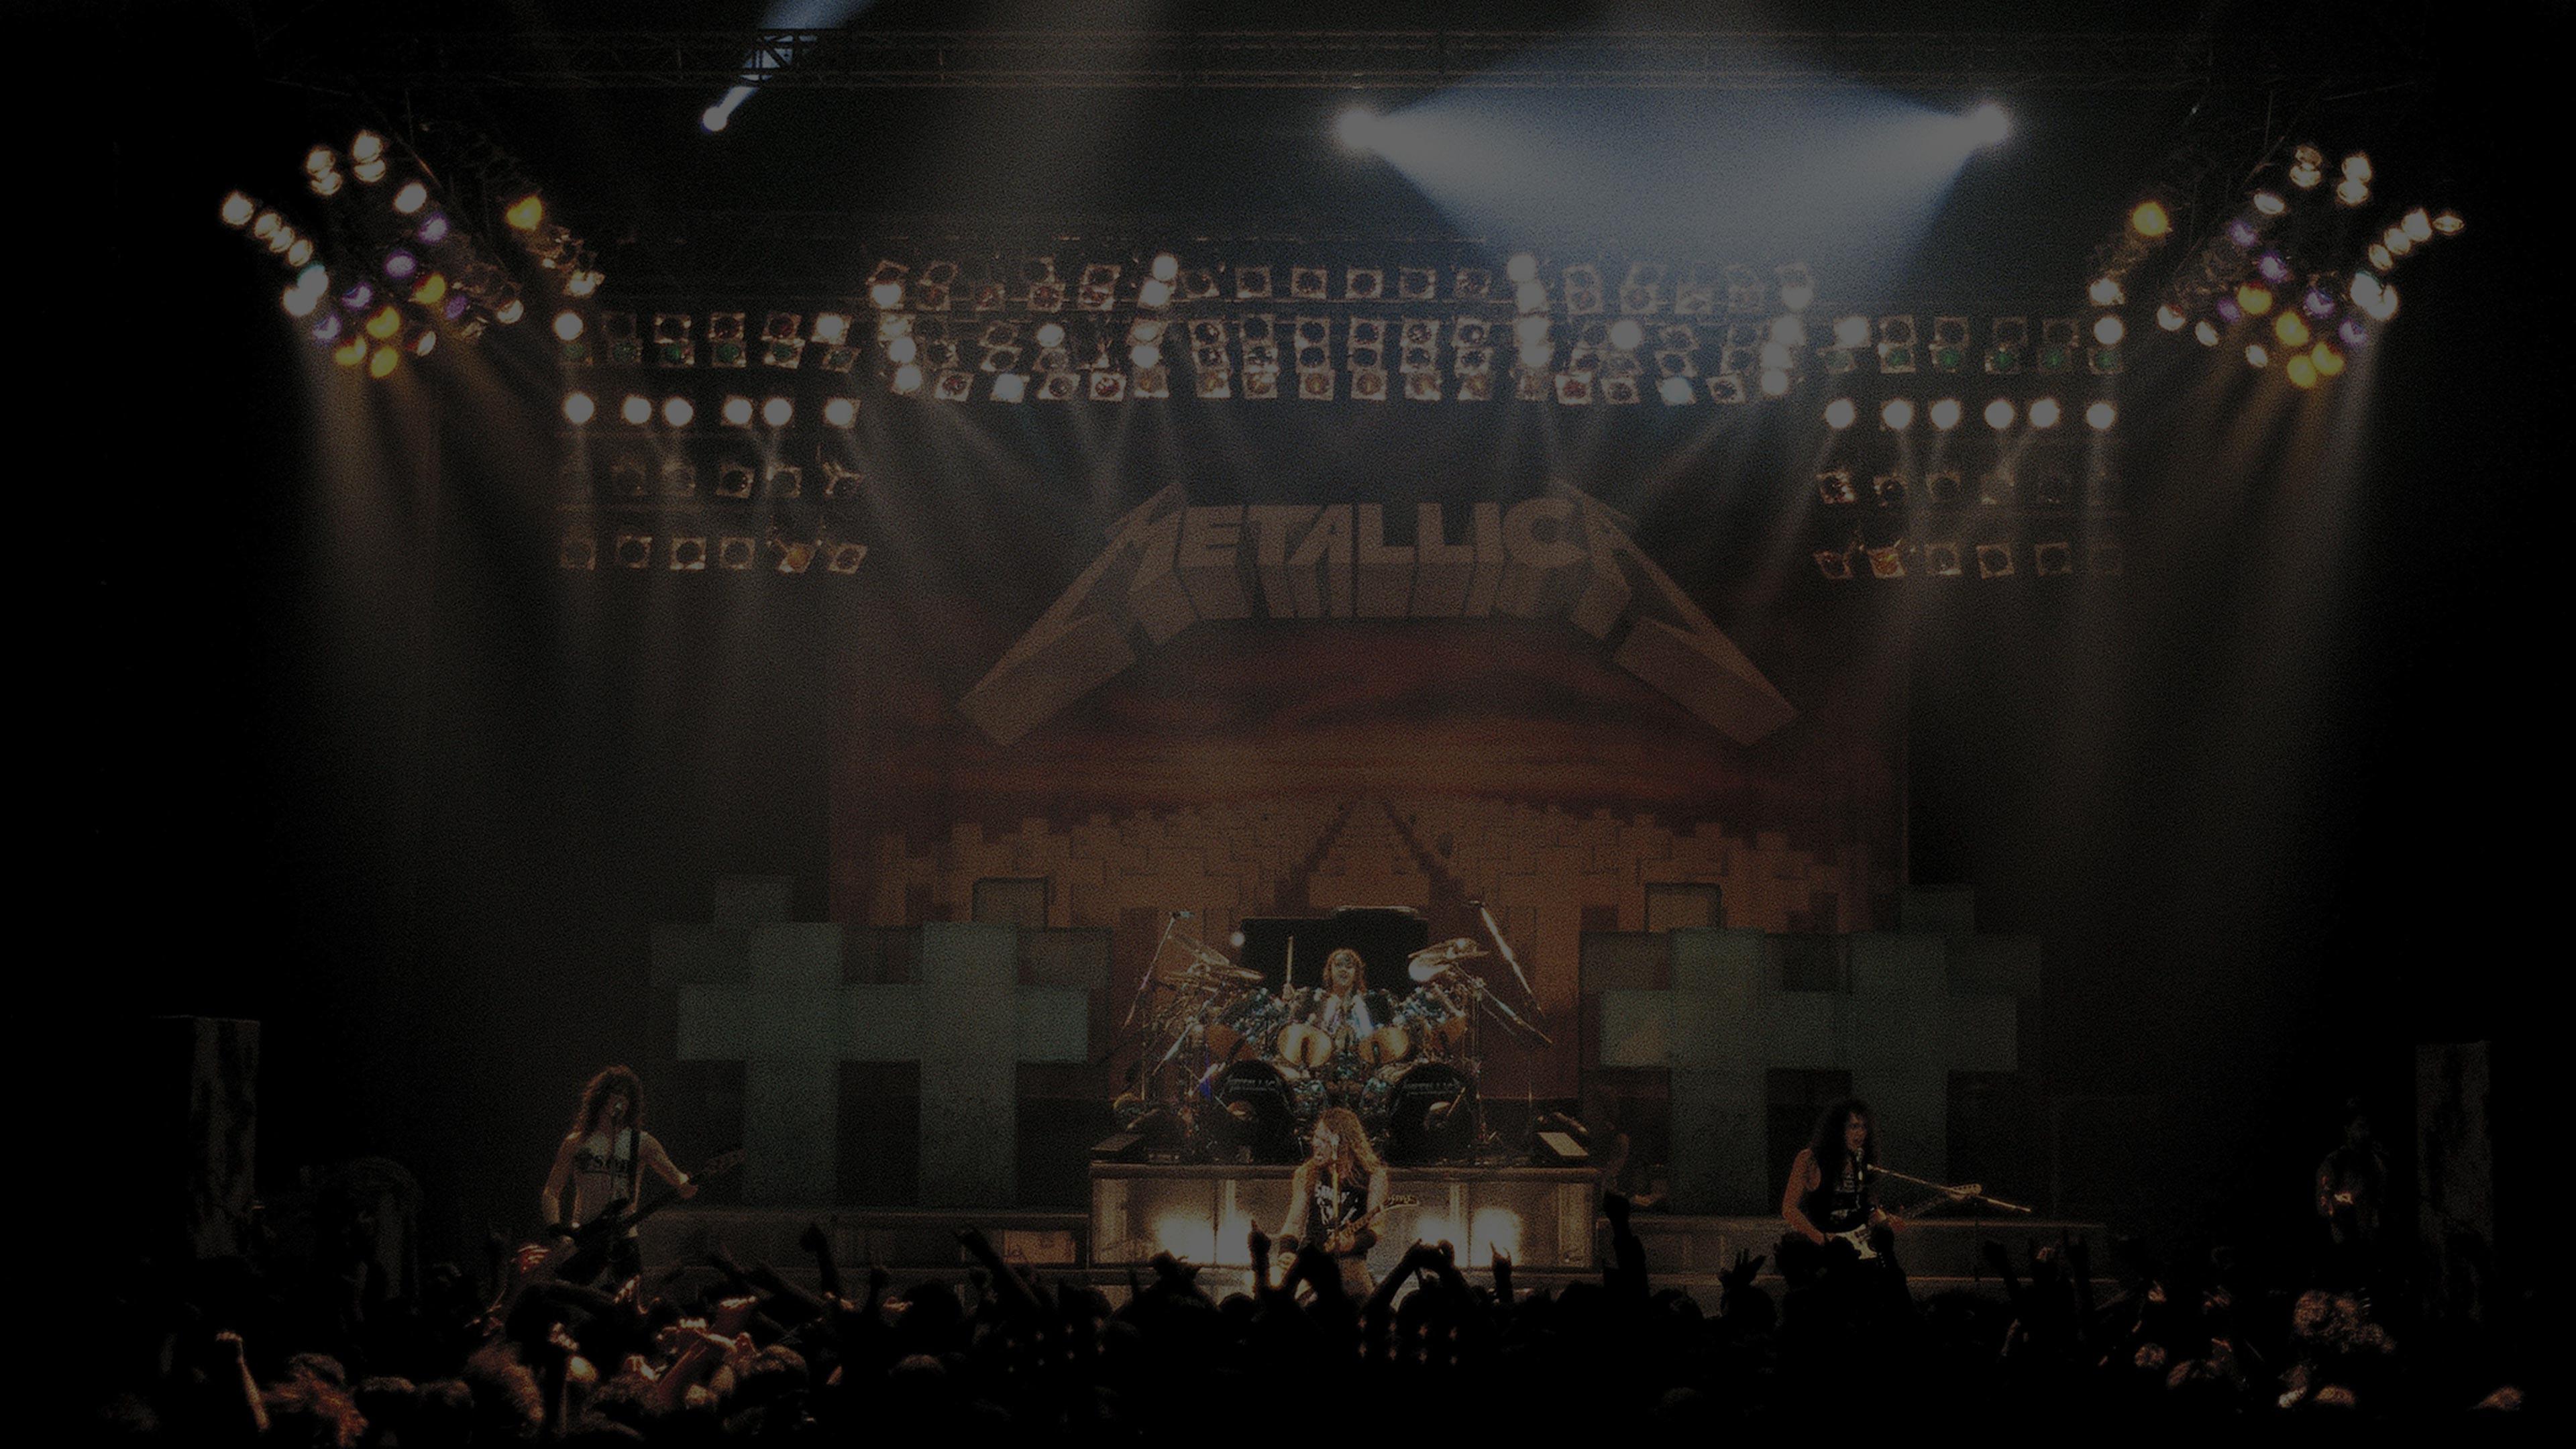 Metallica at P.N.E. Coliseum Theatre Bowl in Vancouver, BC, Canada on December 19, 1986